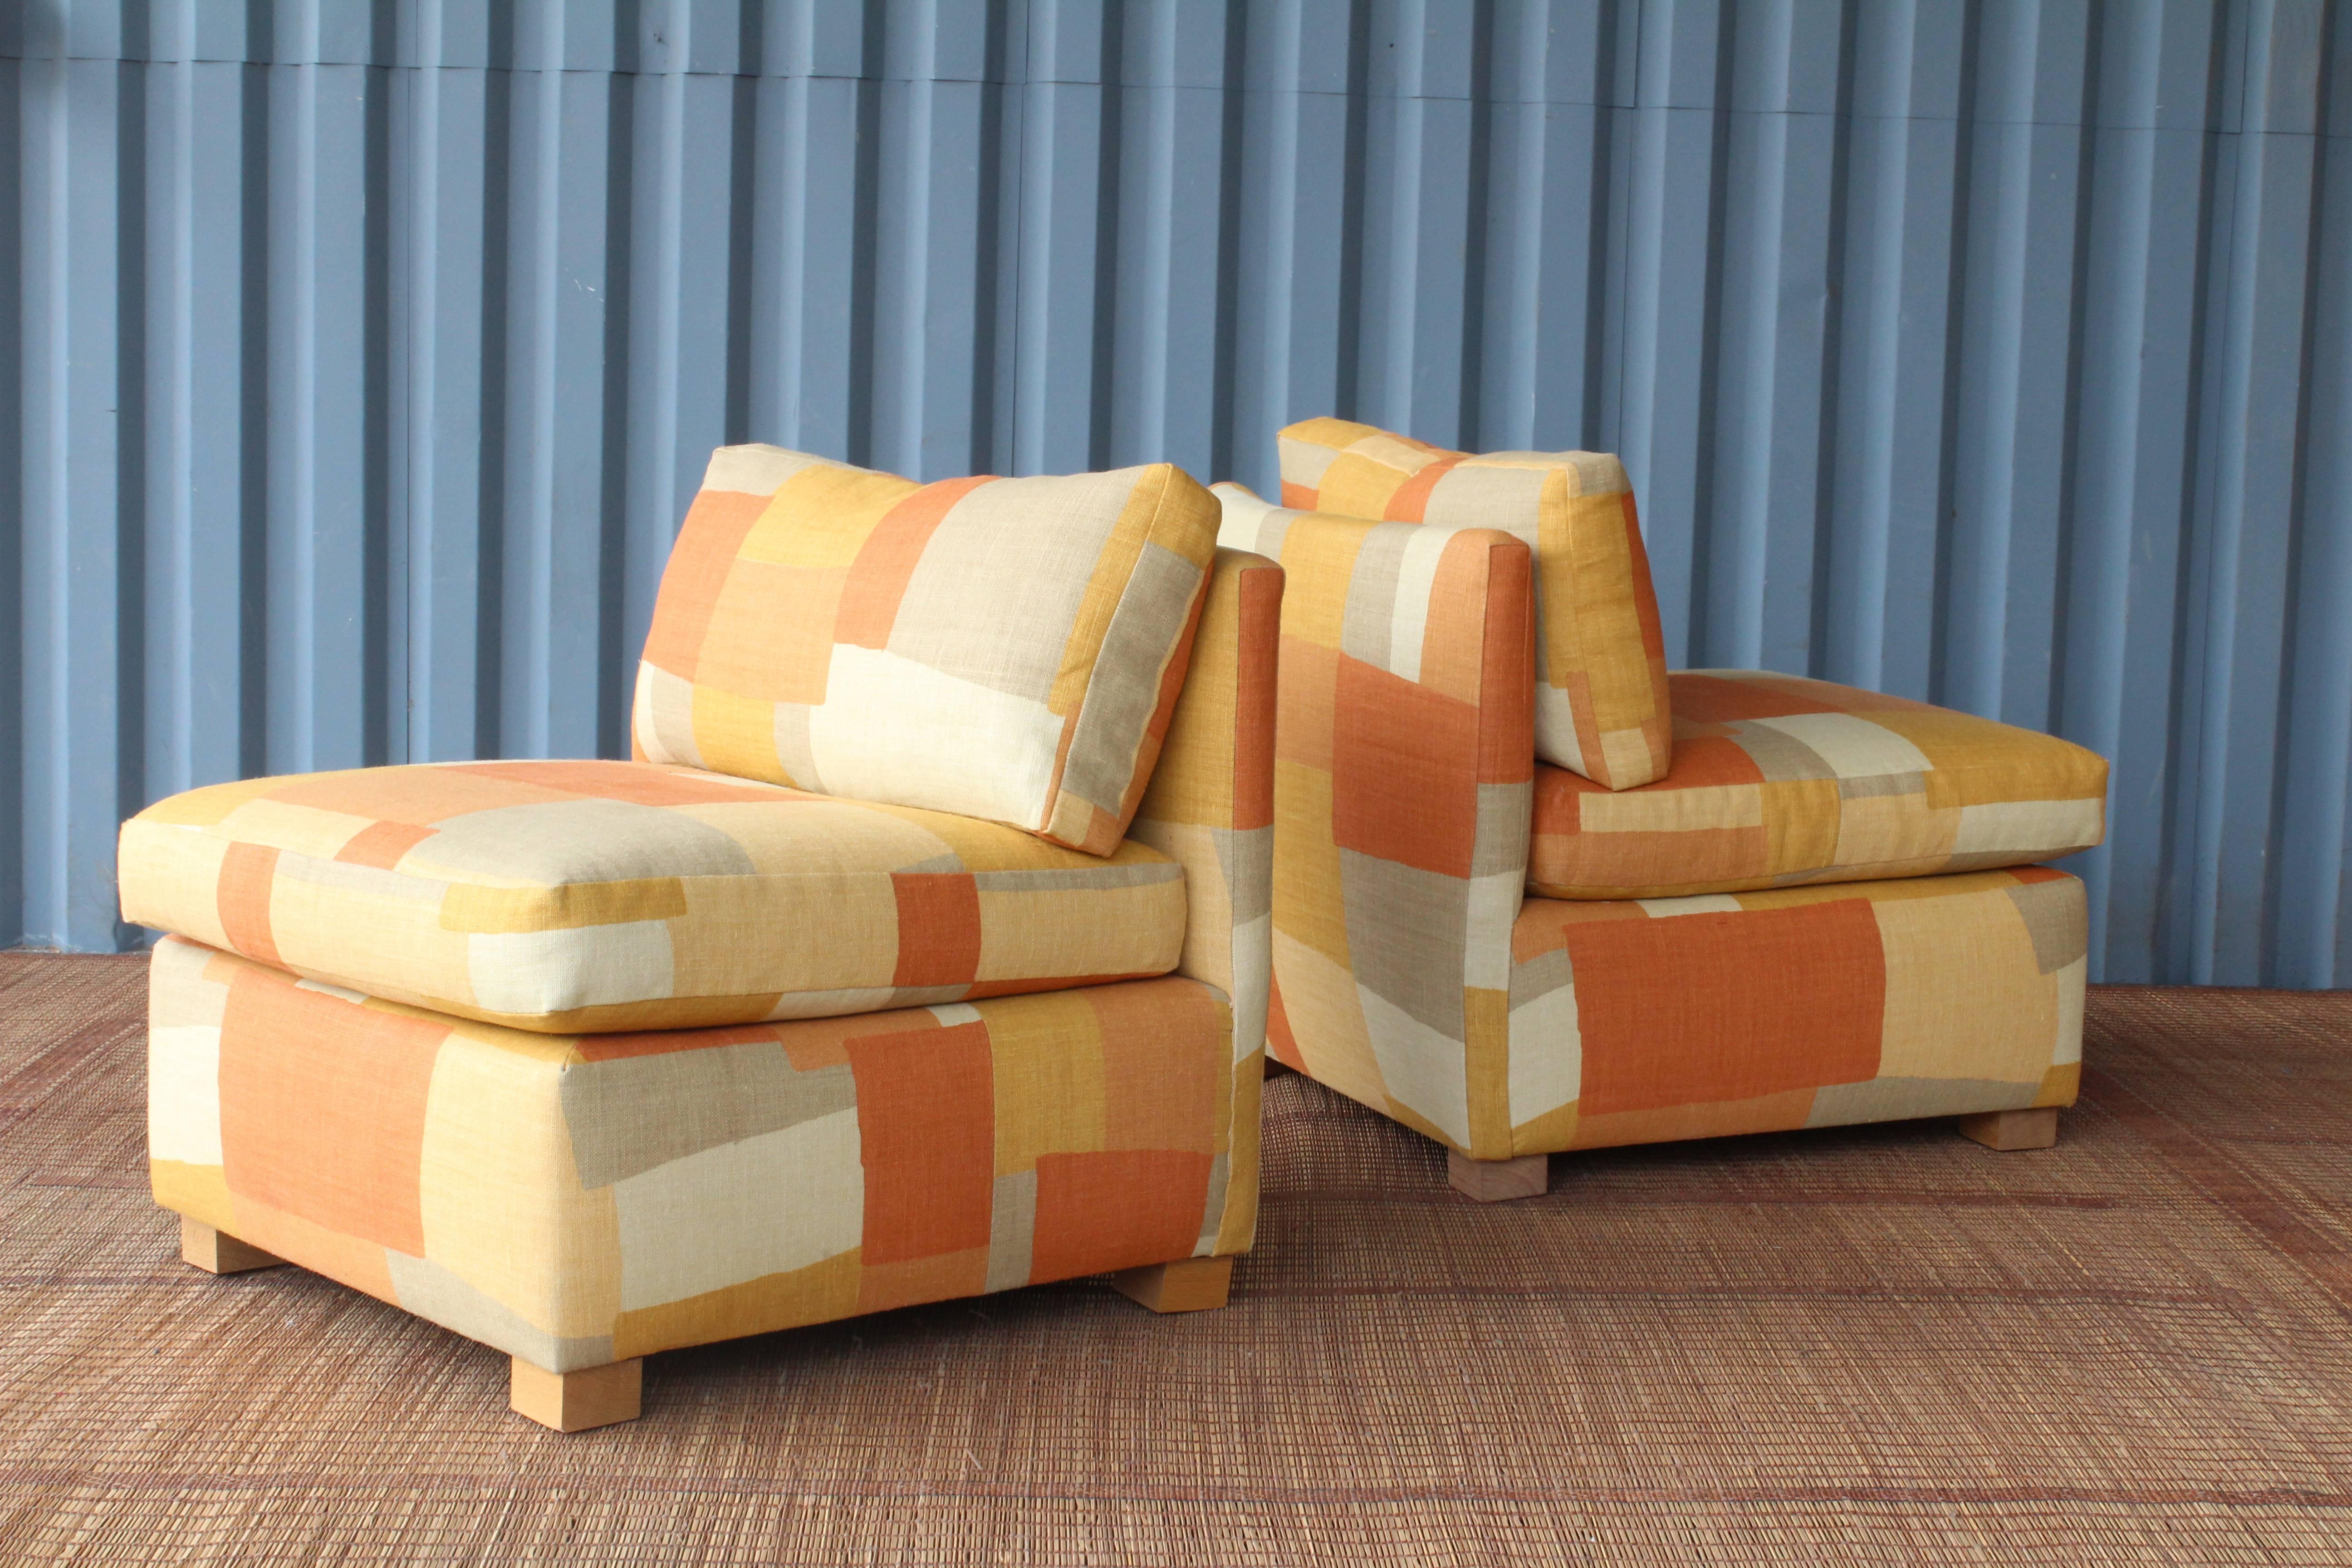 Pair of vintage slipper chairs designed by Milo Baughman for Thayer Coggin, 1970s. Oak feet. The pair have both been reupholstered in new 'Collage' fabric by Peter Dunham Textiles.